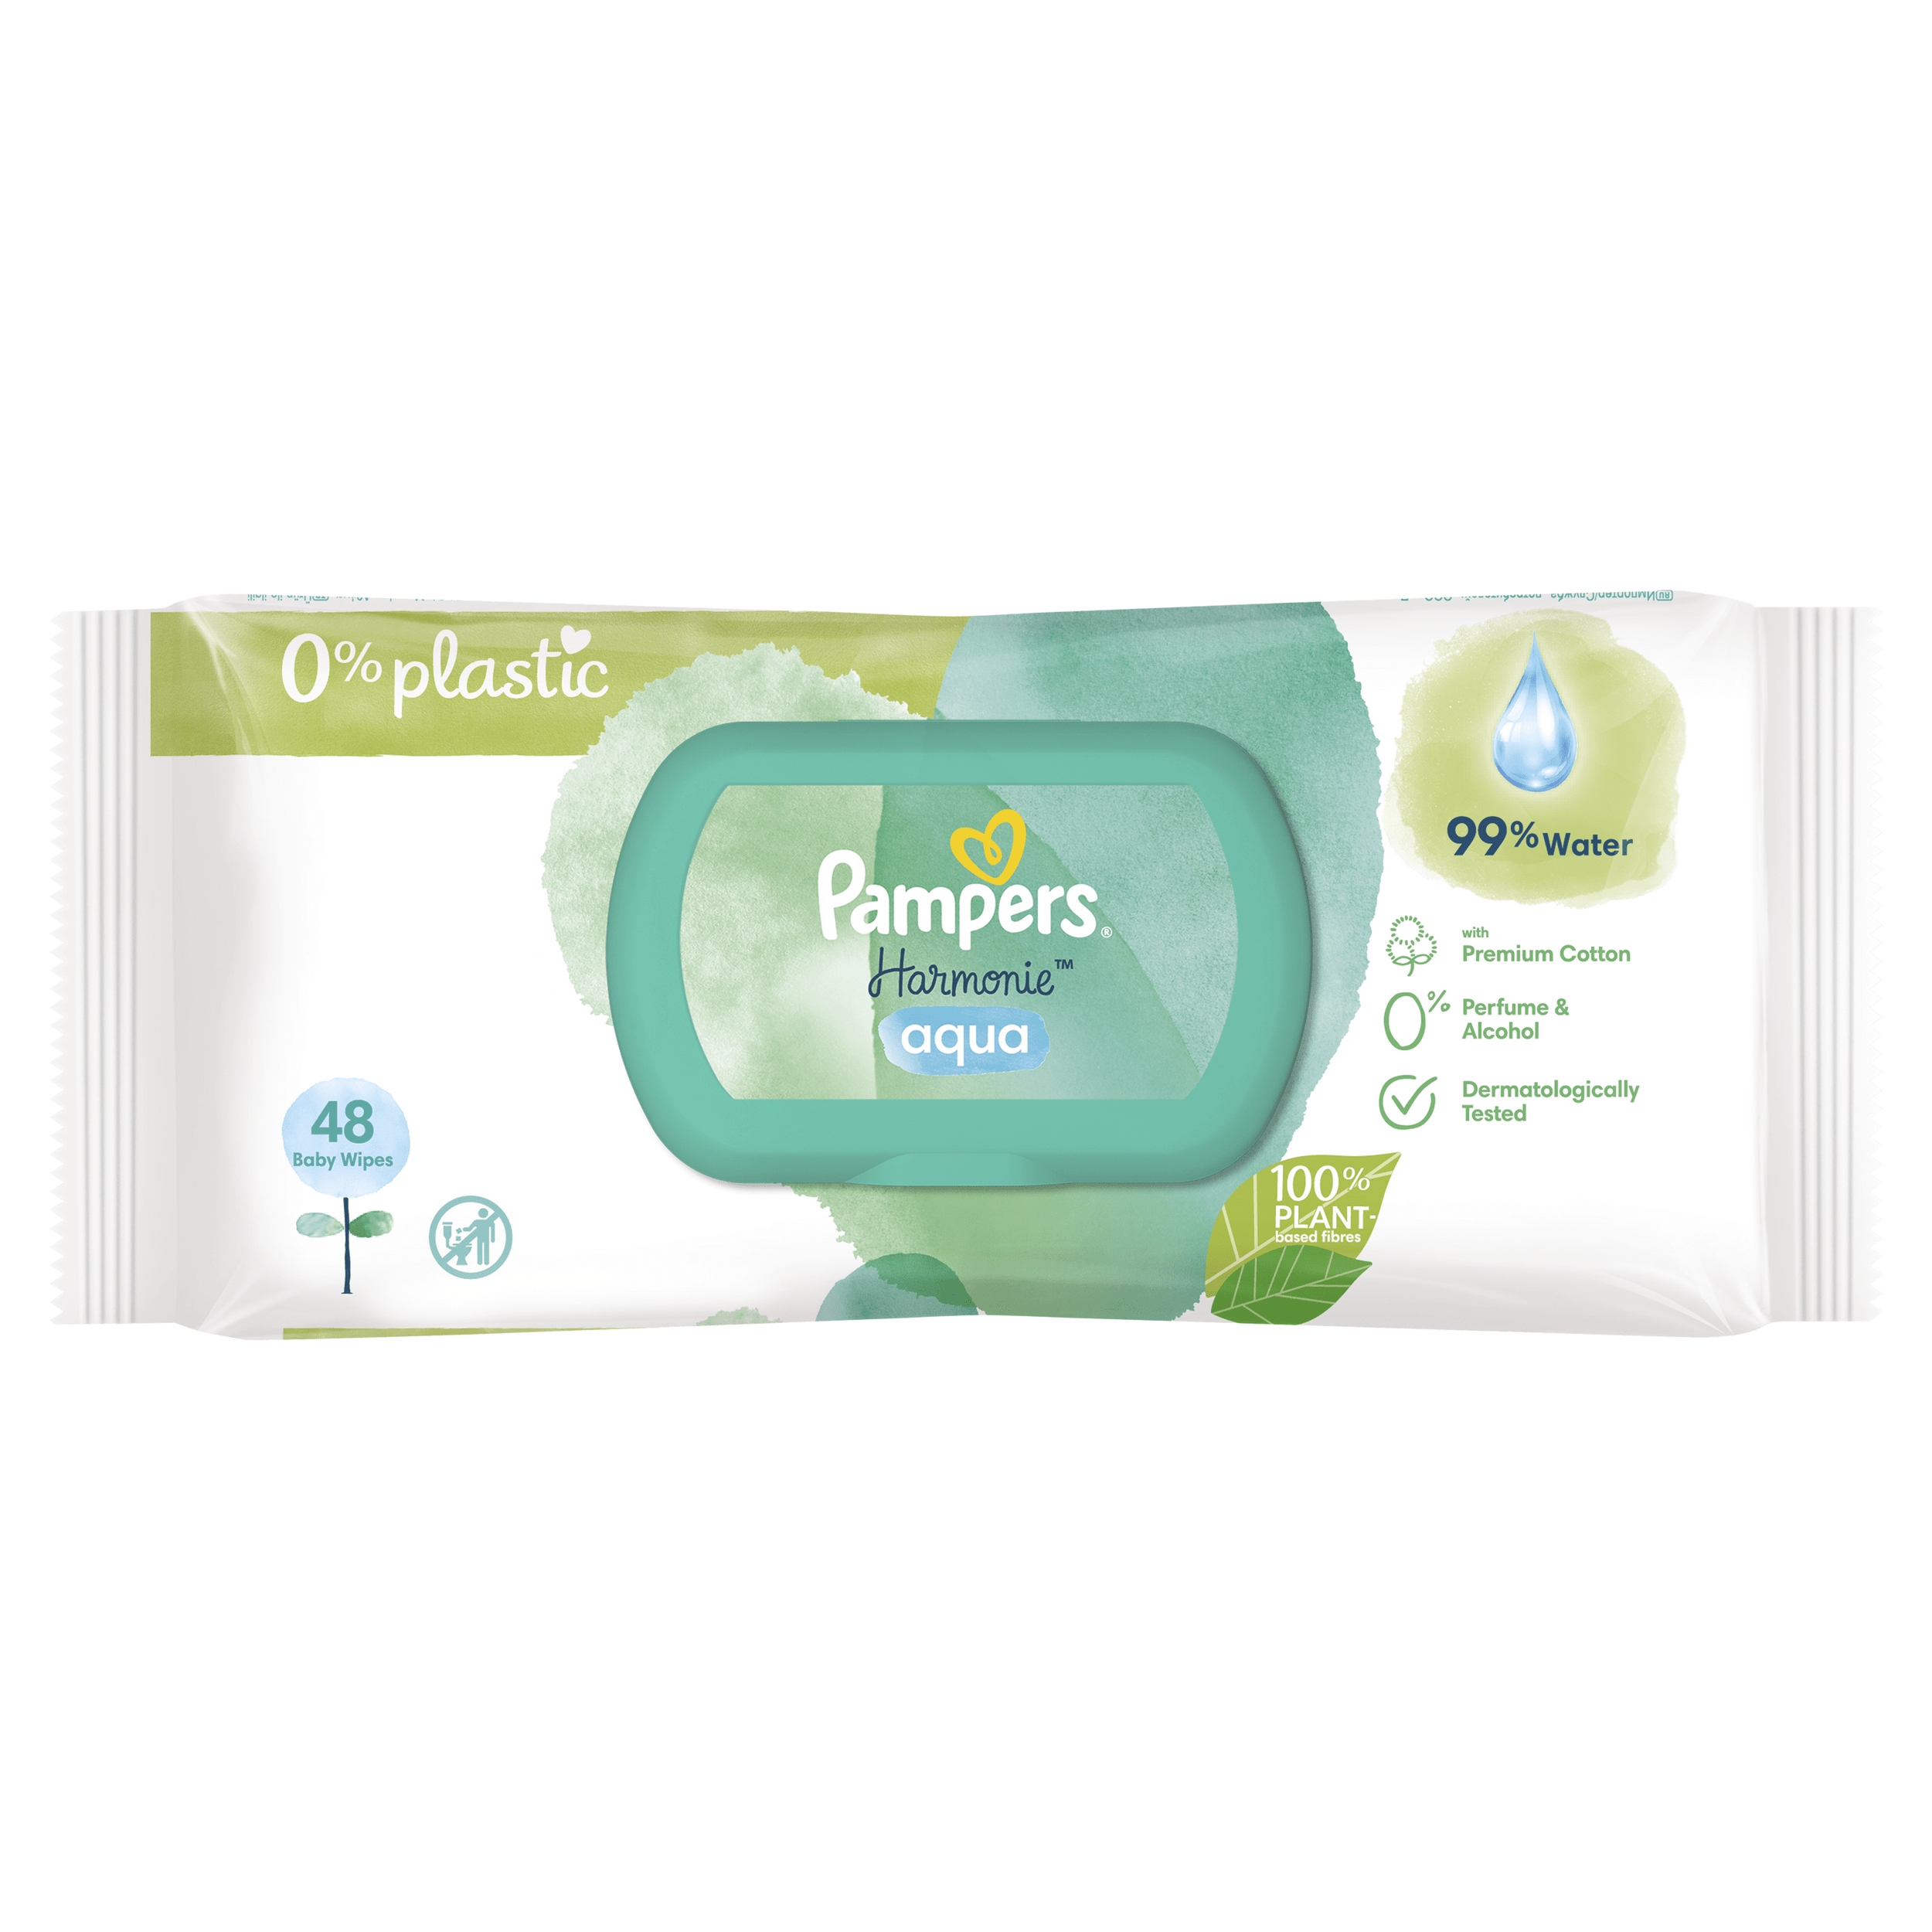 pampers babydream opinie